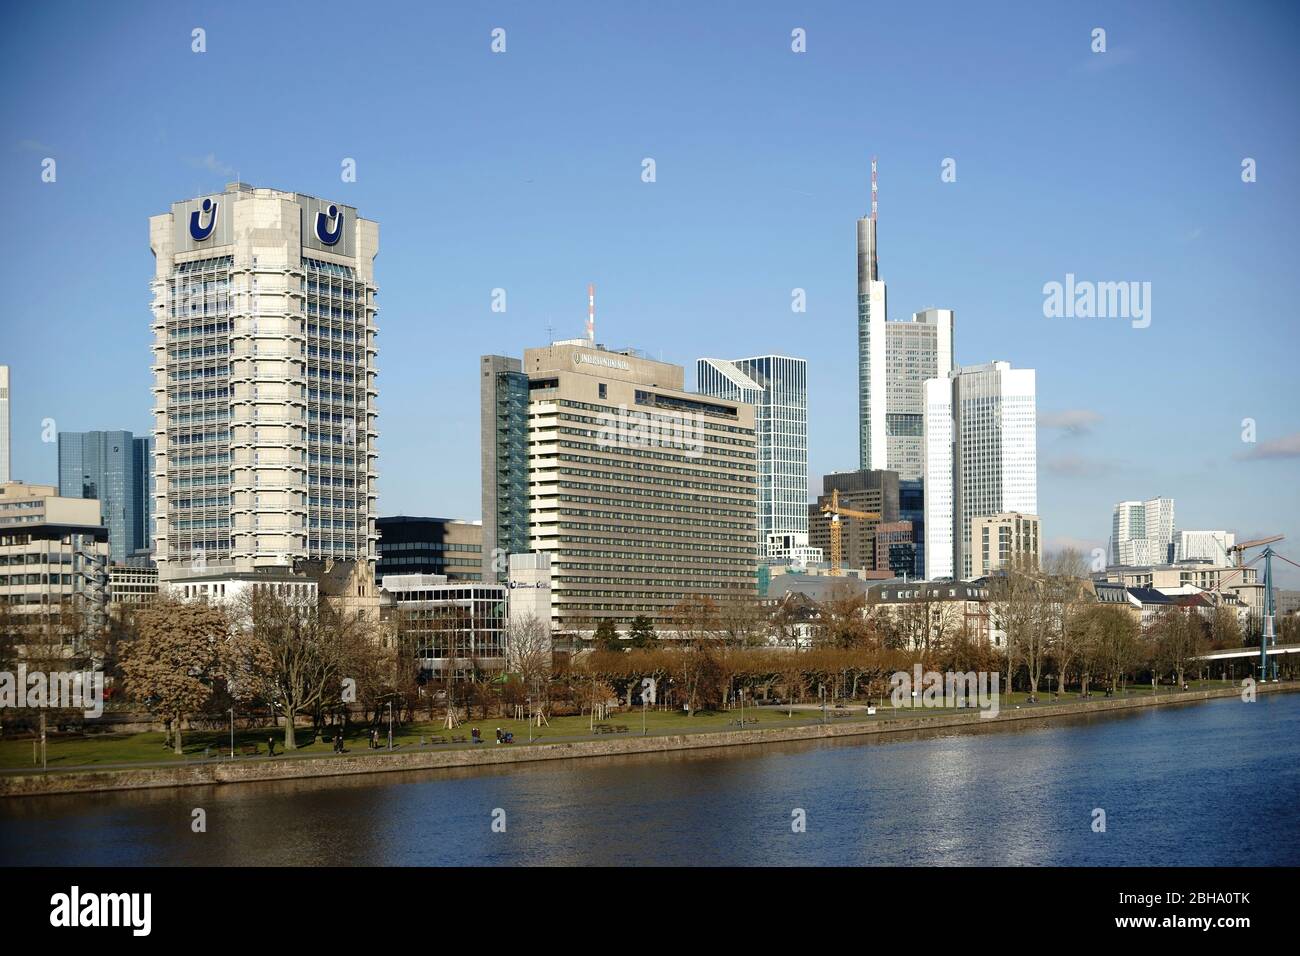 Frankfurt, Germany, Hotel Intercontinental, the Union Investment skyscraper, the Commerzbank Tower and other buildings and skyscrapers along the River Main Stock Photo